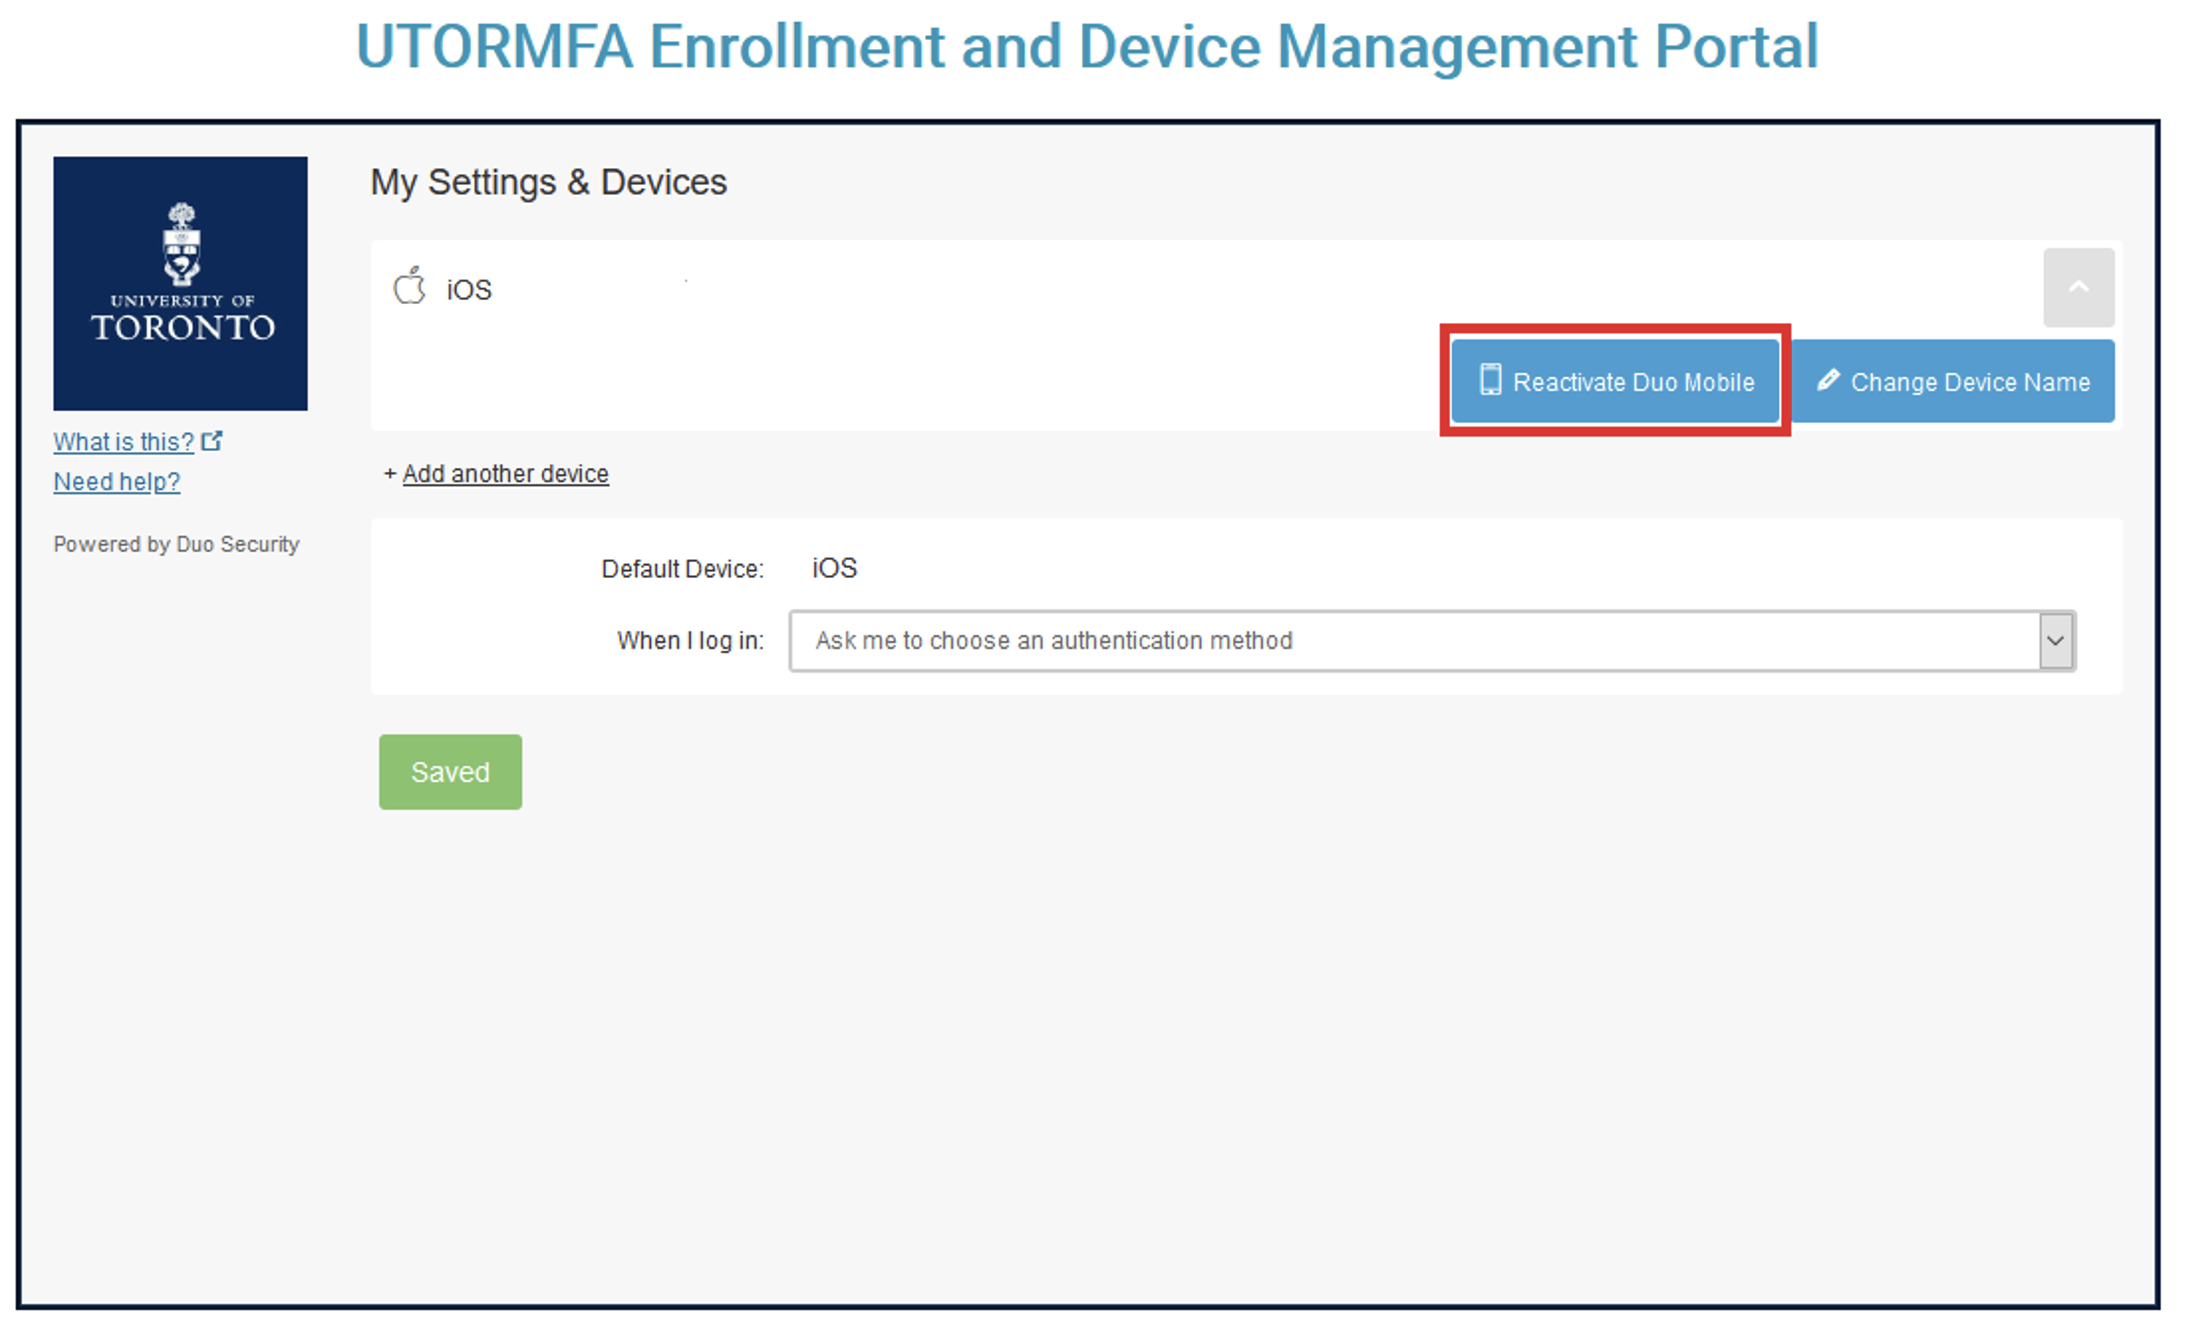 Screenshot of the UTORMFA enrollment and device management portal with the button "Reactivate Duo Mobile" highlighted.